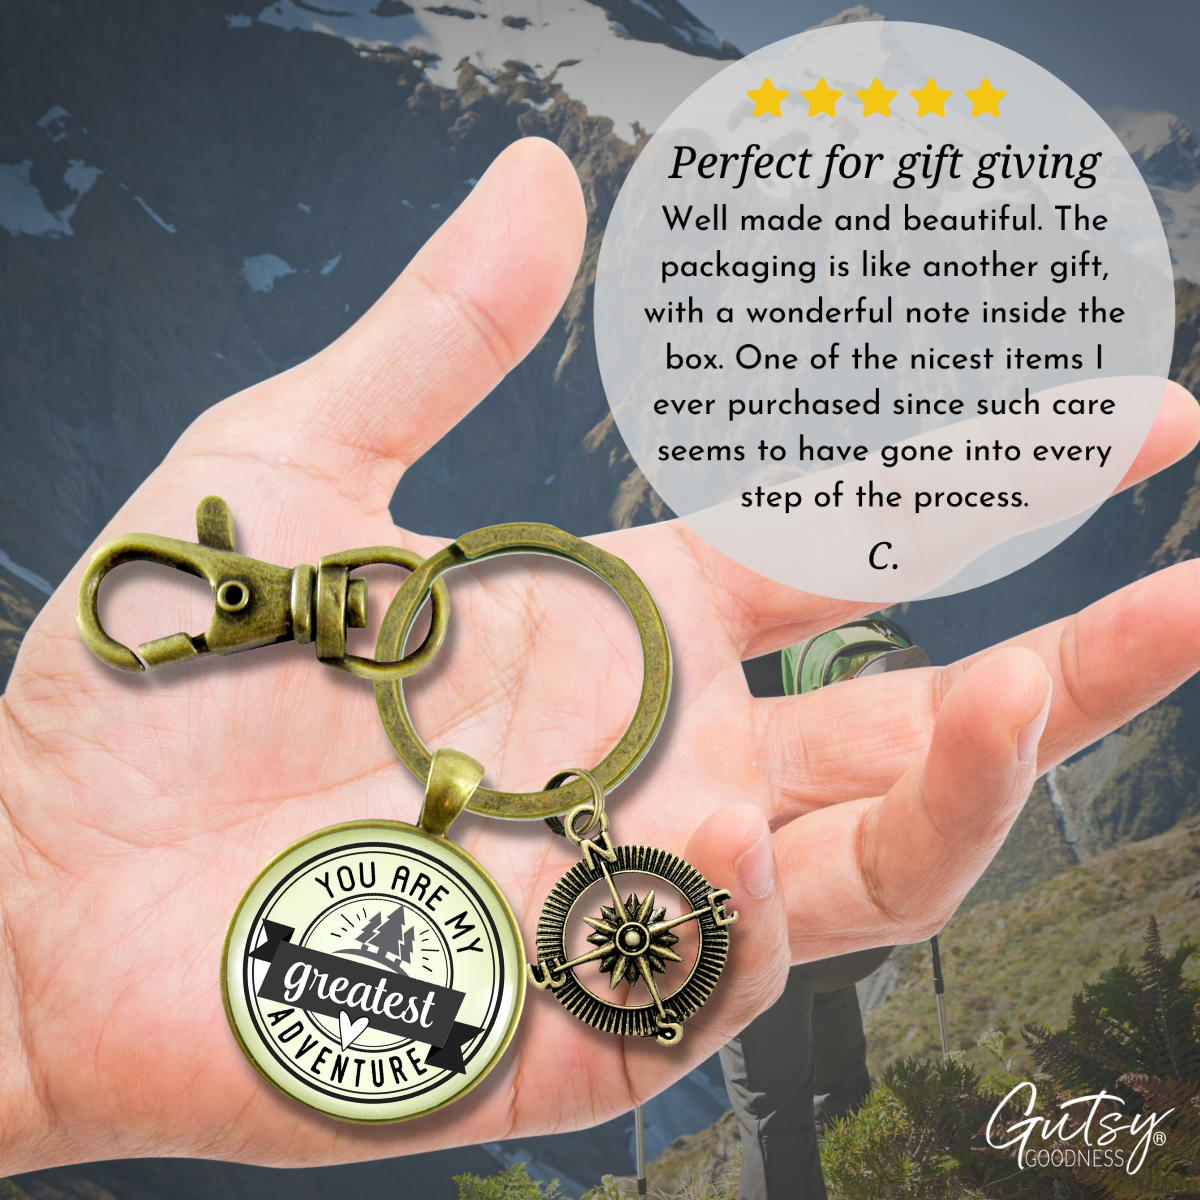 You are My Greatest Adventure Compass Keychain Romantic Couple Gift  Keychain - Unisex - Gutsy Goodness Handmade Jewelry